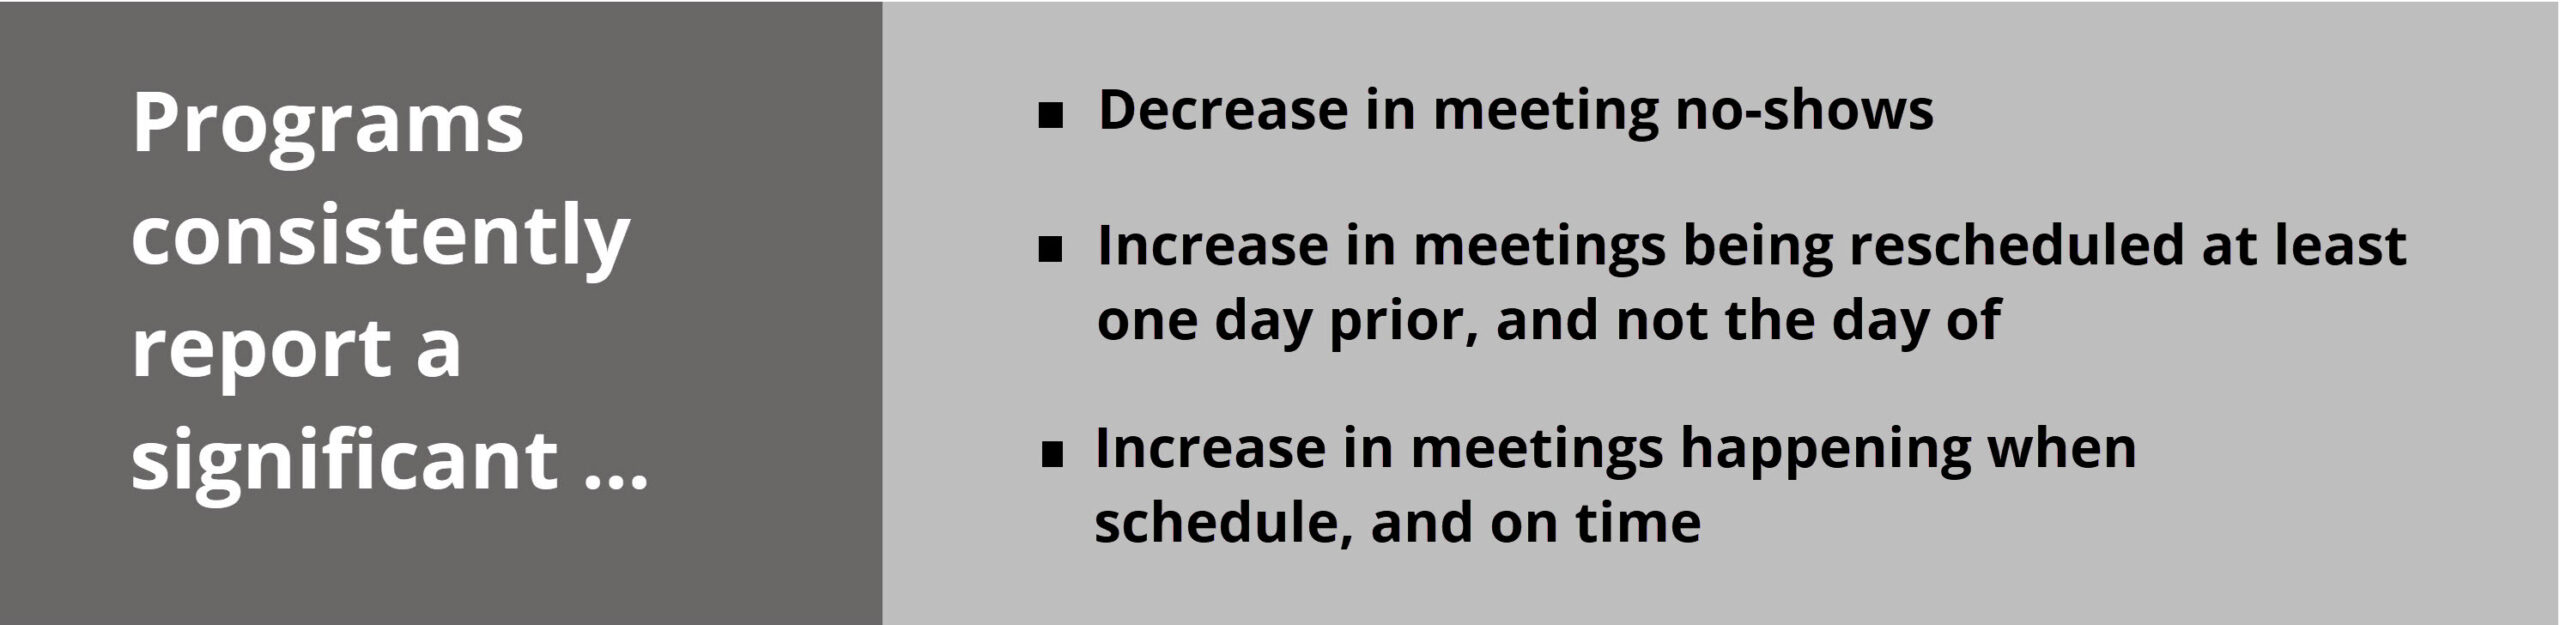 The benefits of nudges- decrease in no-shows and increase in on-time meetings